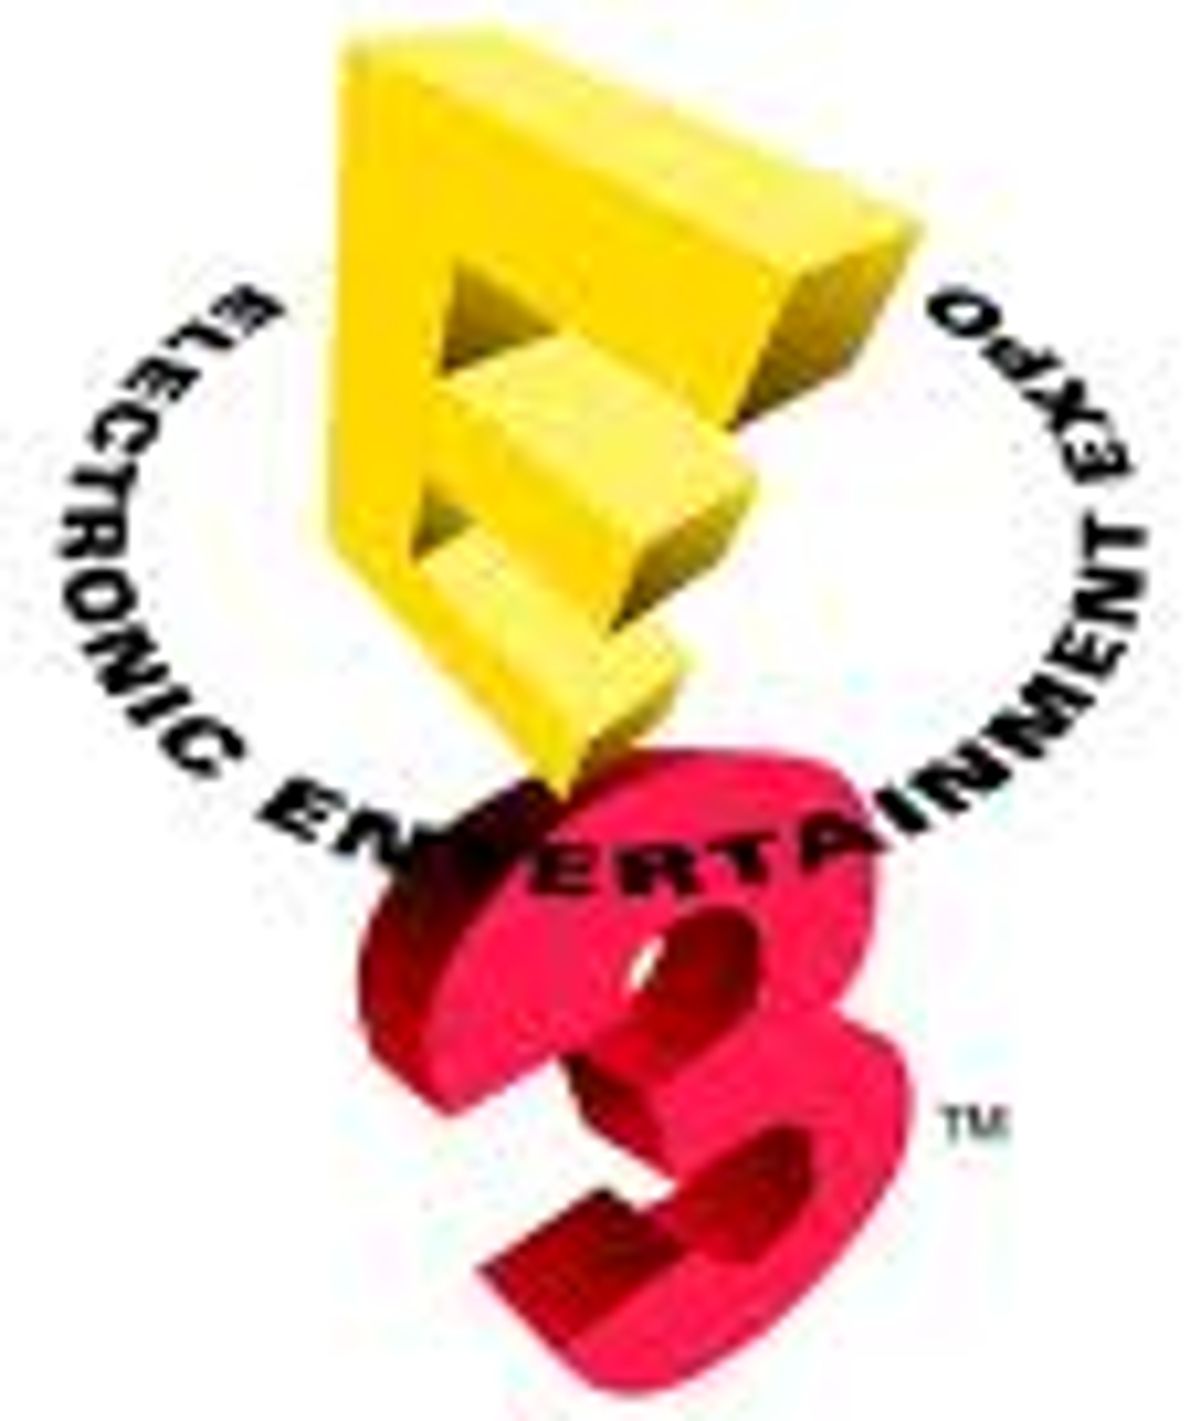 Early Videogame Buzz at E3